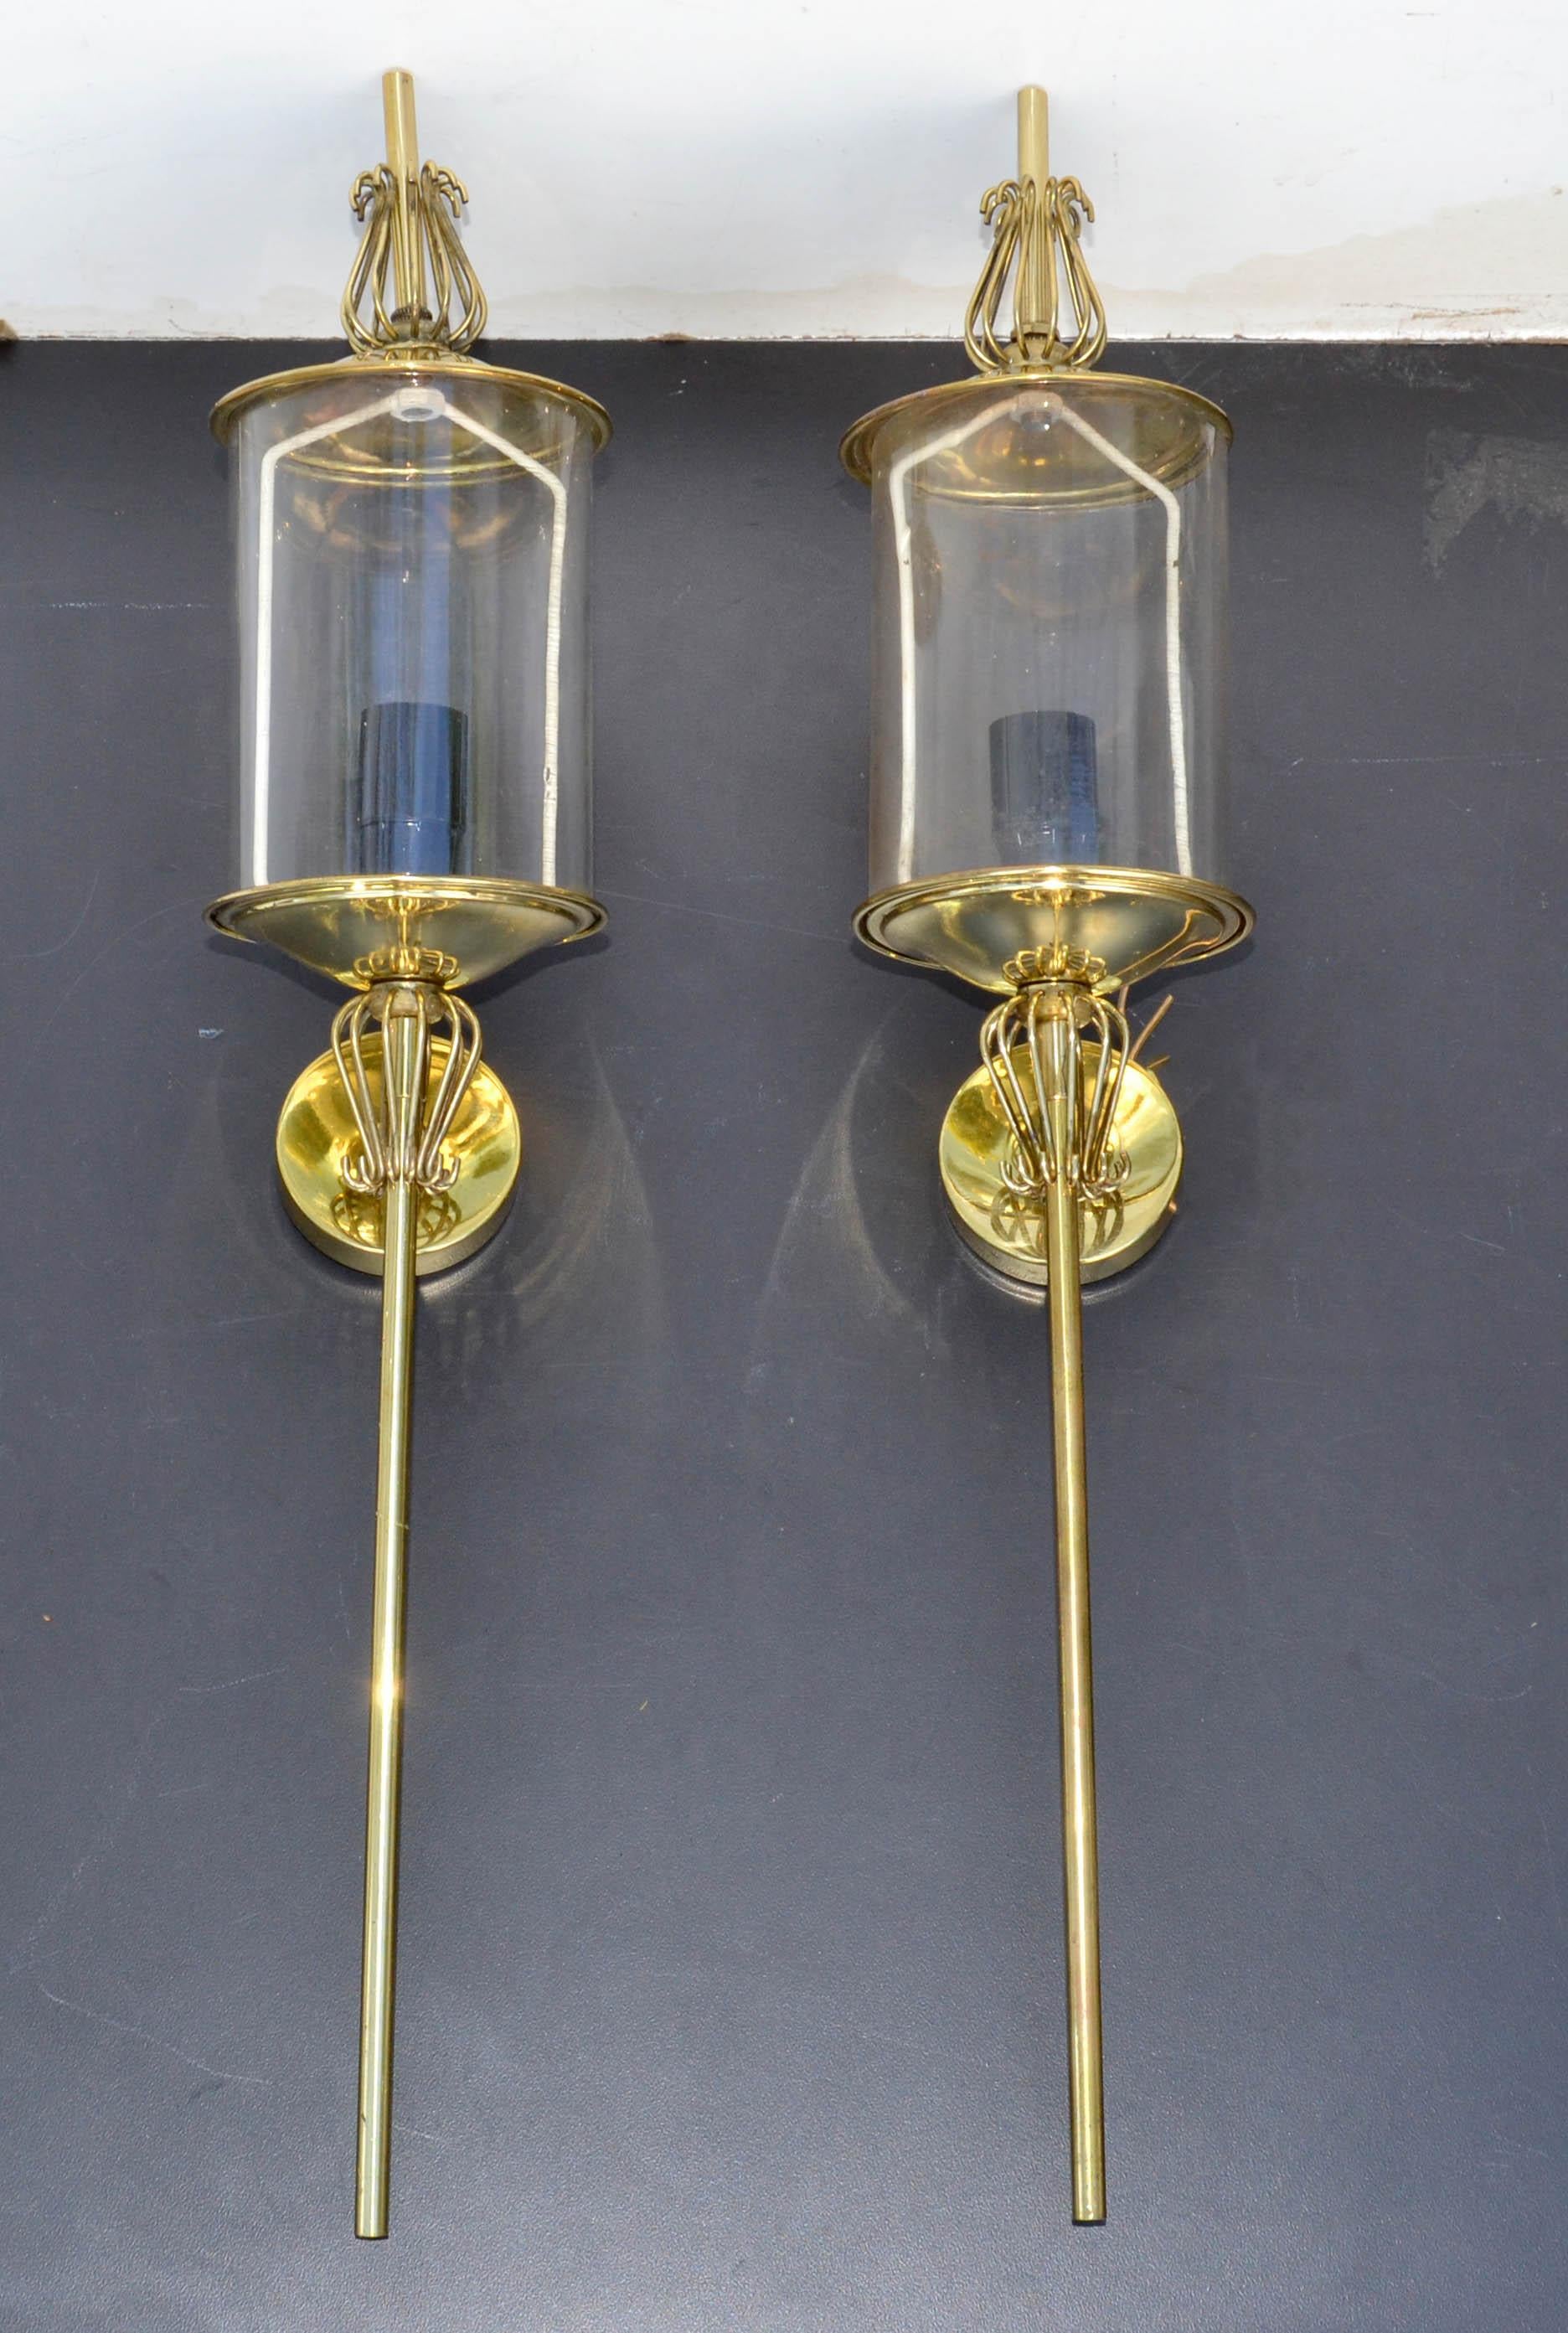 Pair of Maison Lunel Brass & Glass Sconces, Wall Lamp French Mid-Century Modern For Sale 5